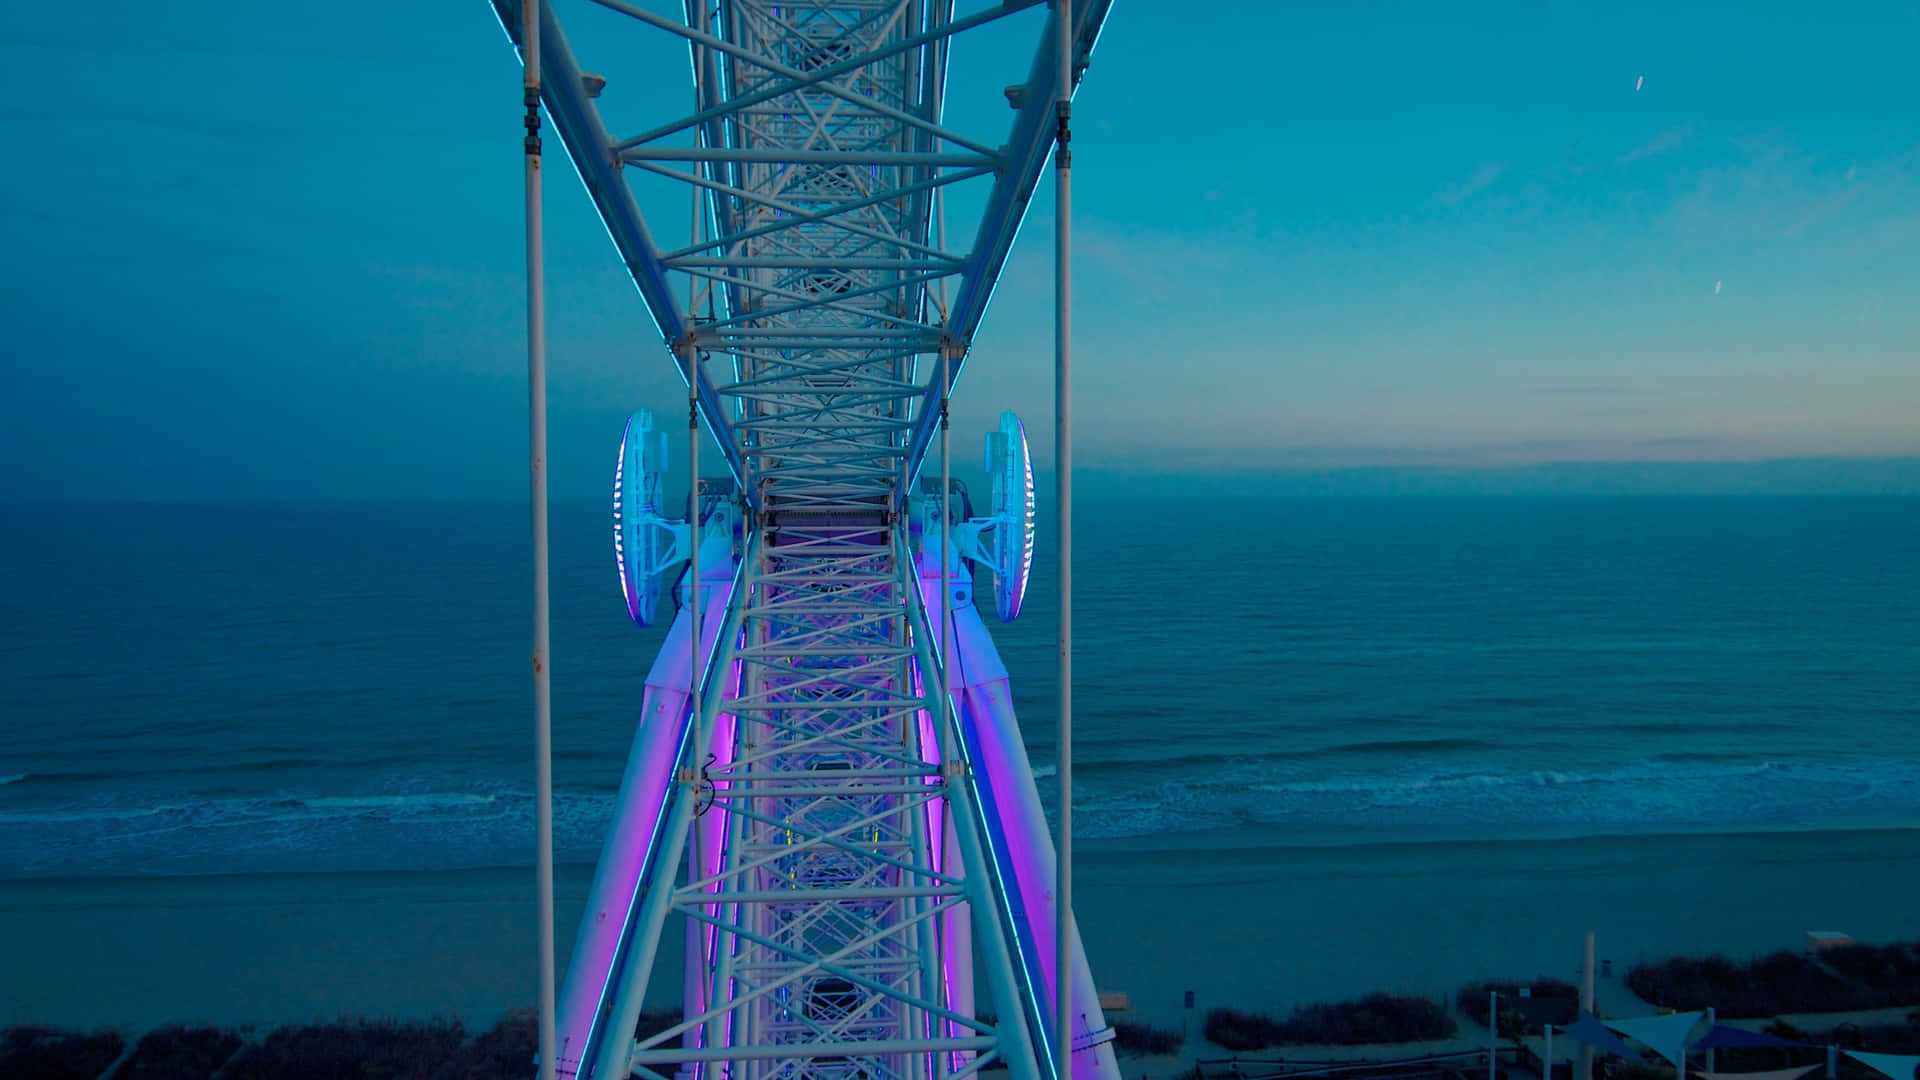 Explore the natural beauty of Myrtle Beach